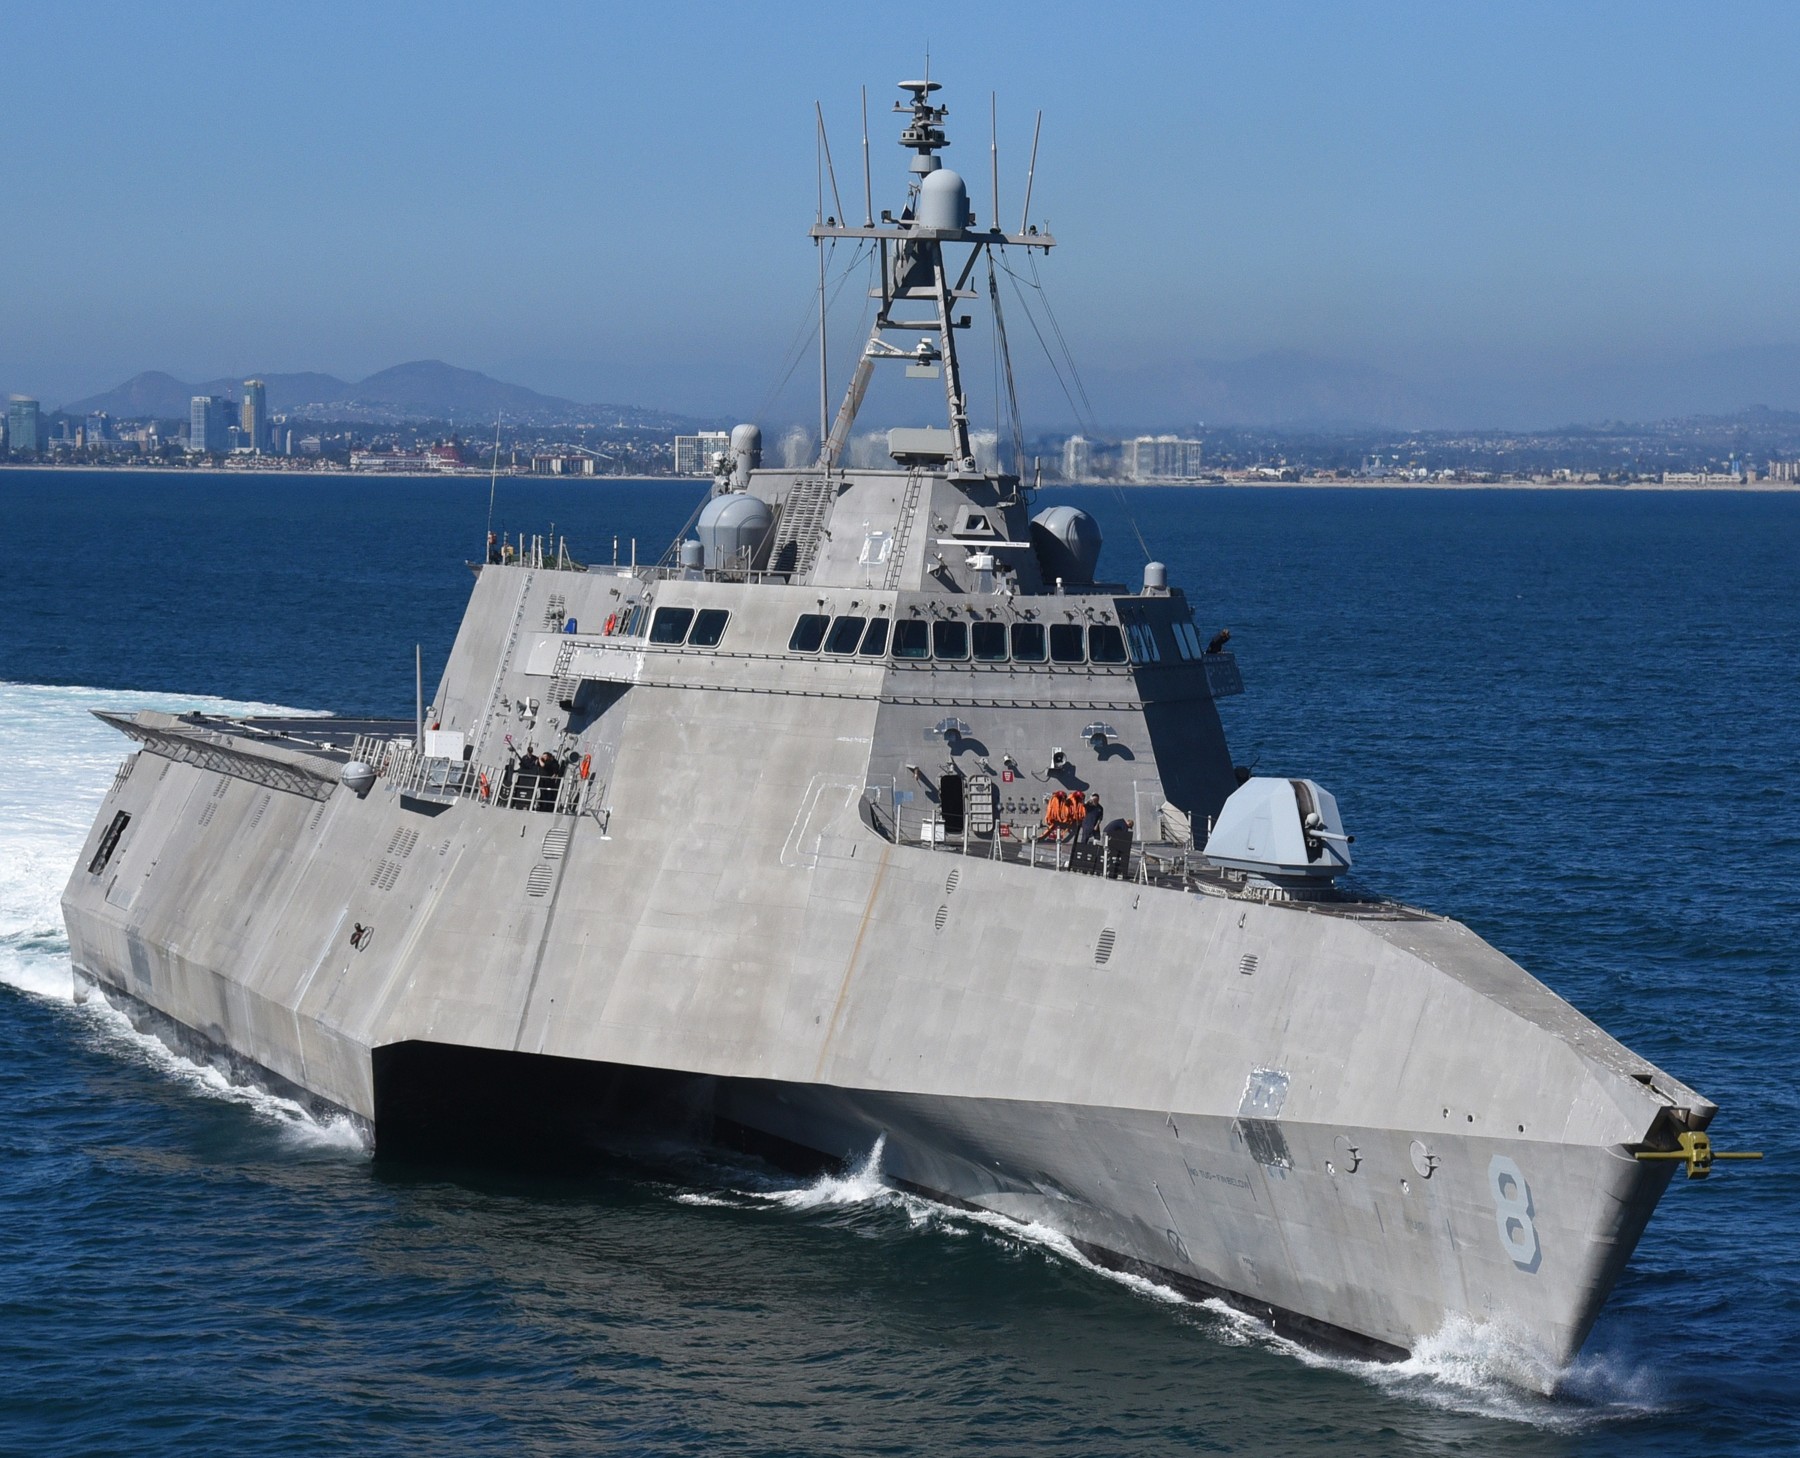 lcs-8 uss montgomery independence class littoral combat ship us navy 48